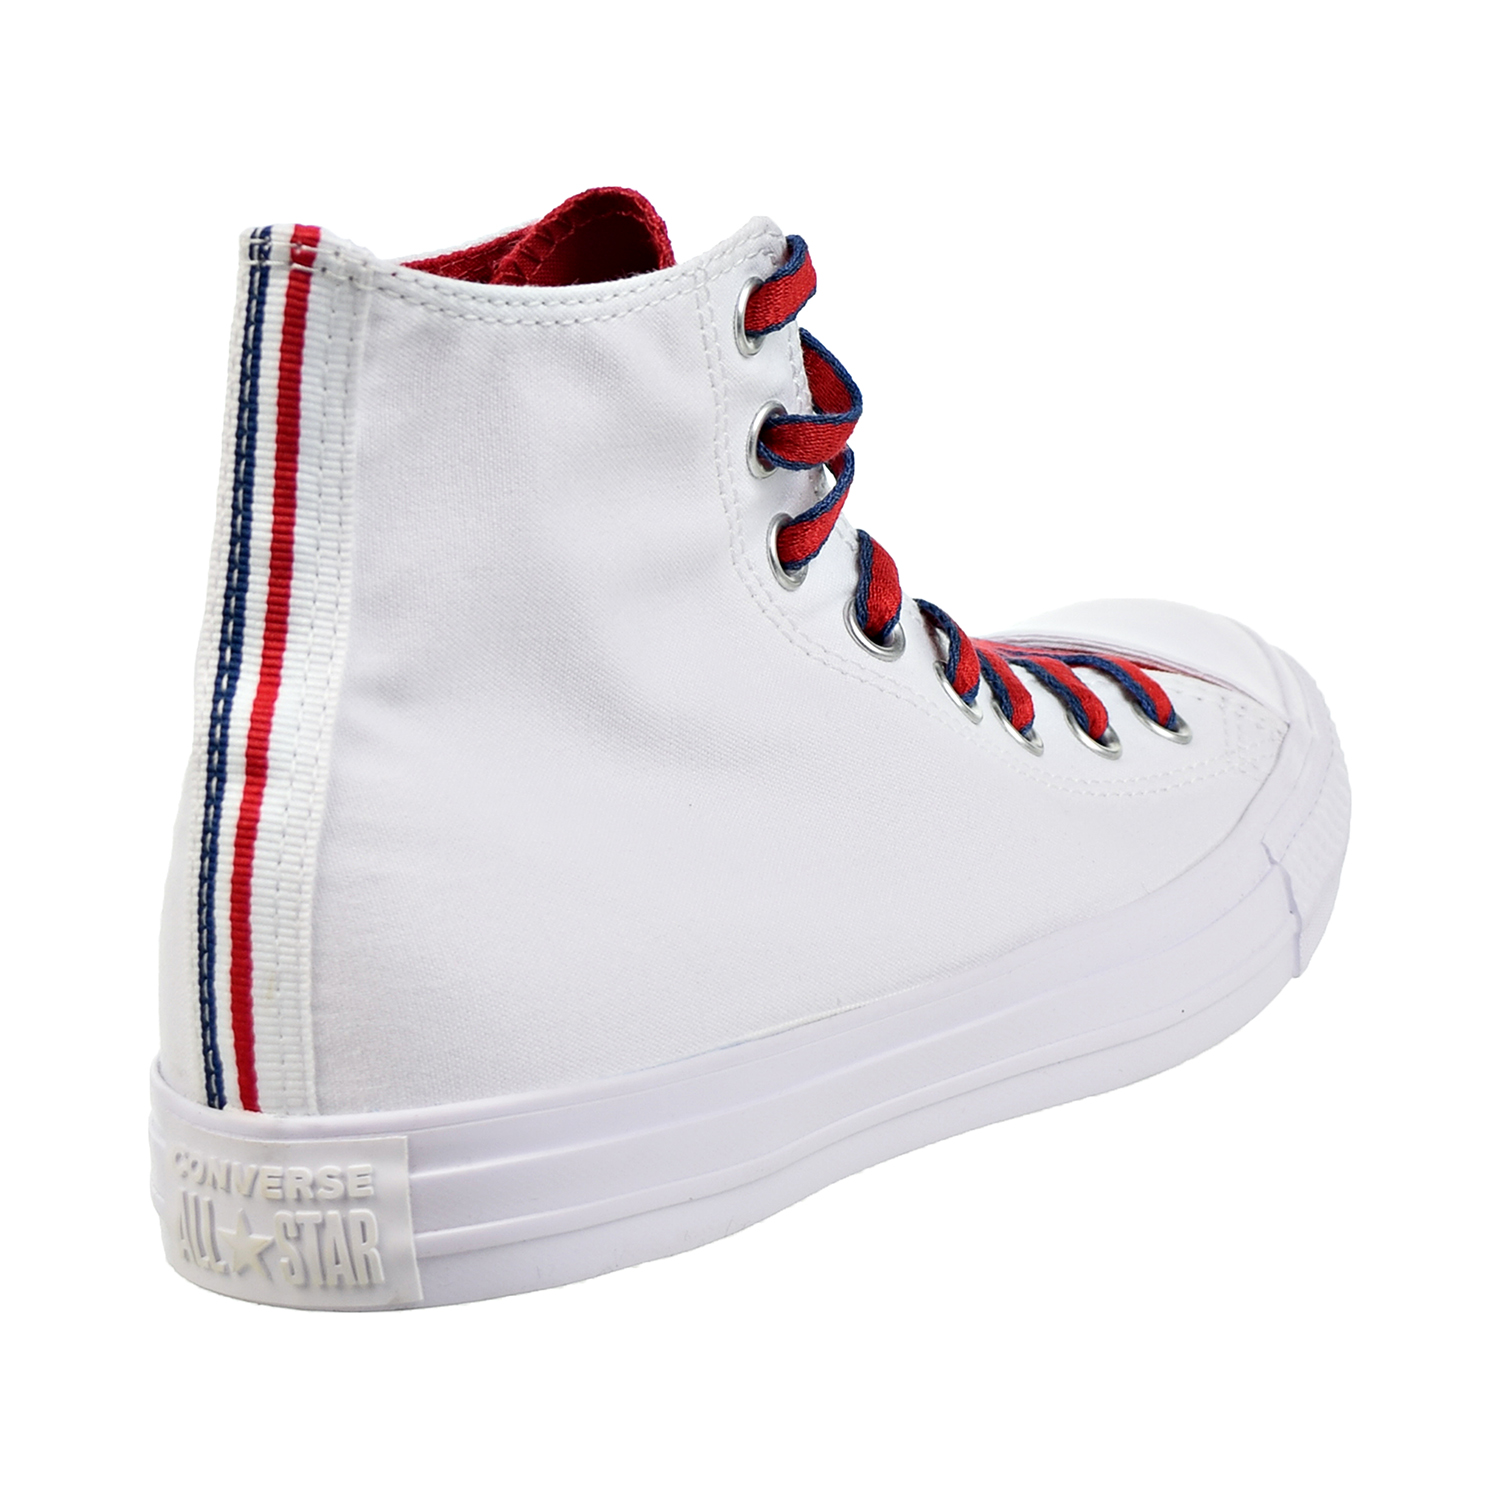 Converse Chuck Taylor All Star High Top Mens Shoes White/Gym Red/Navy 160466c (4 M US)